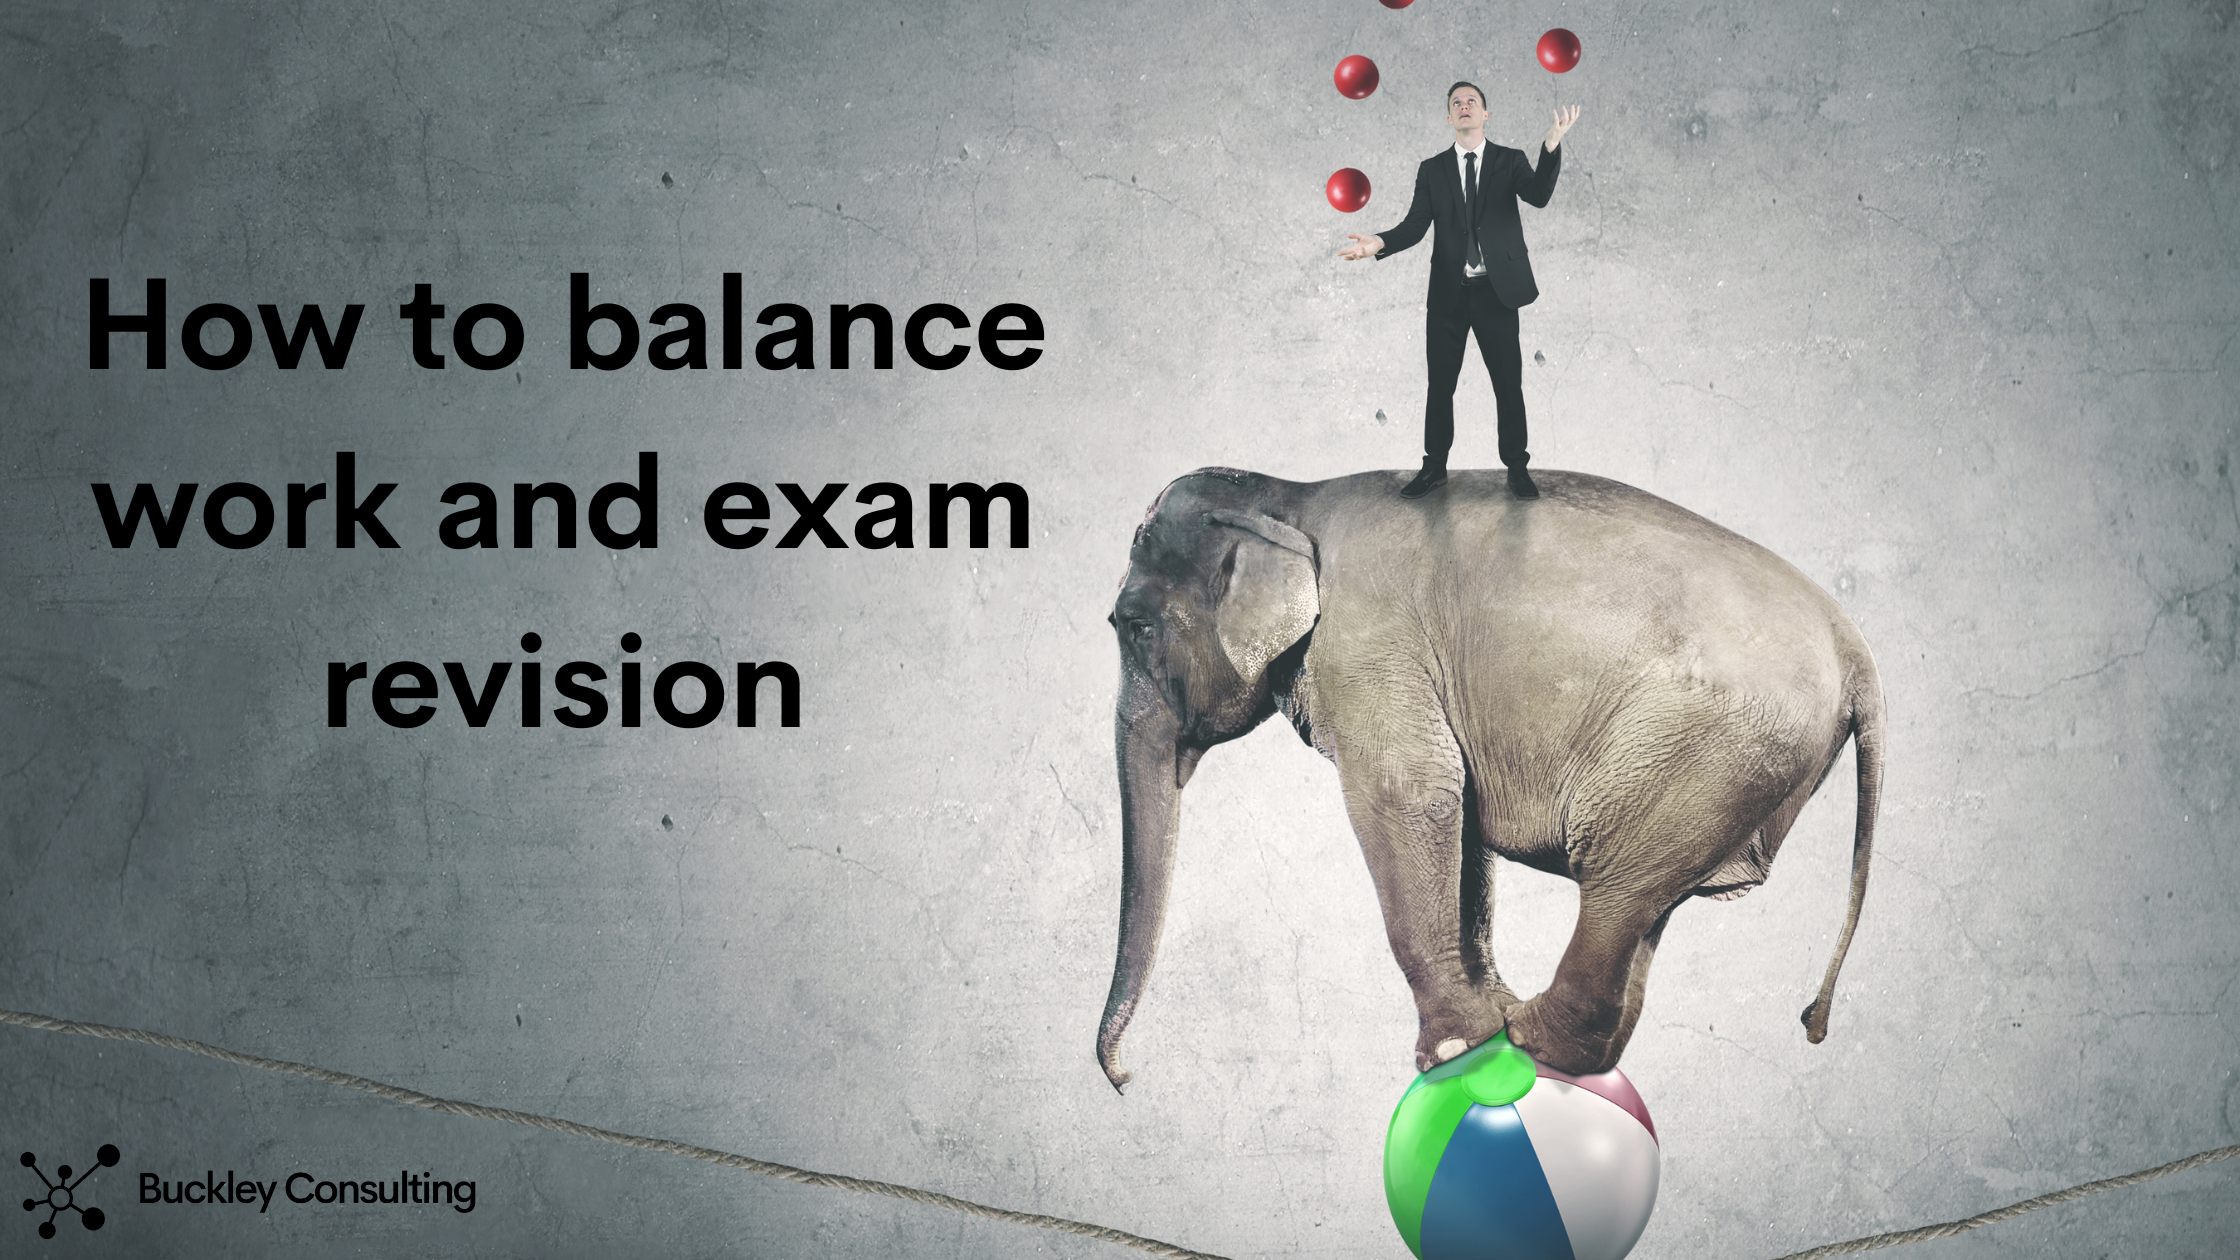 How to balance work and exam revision